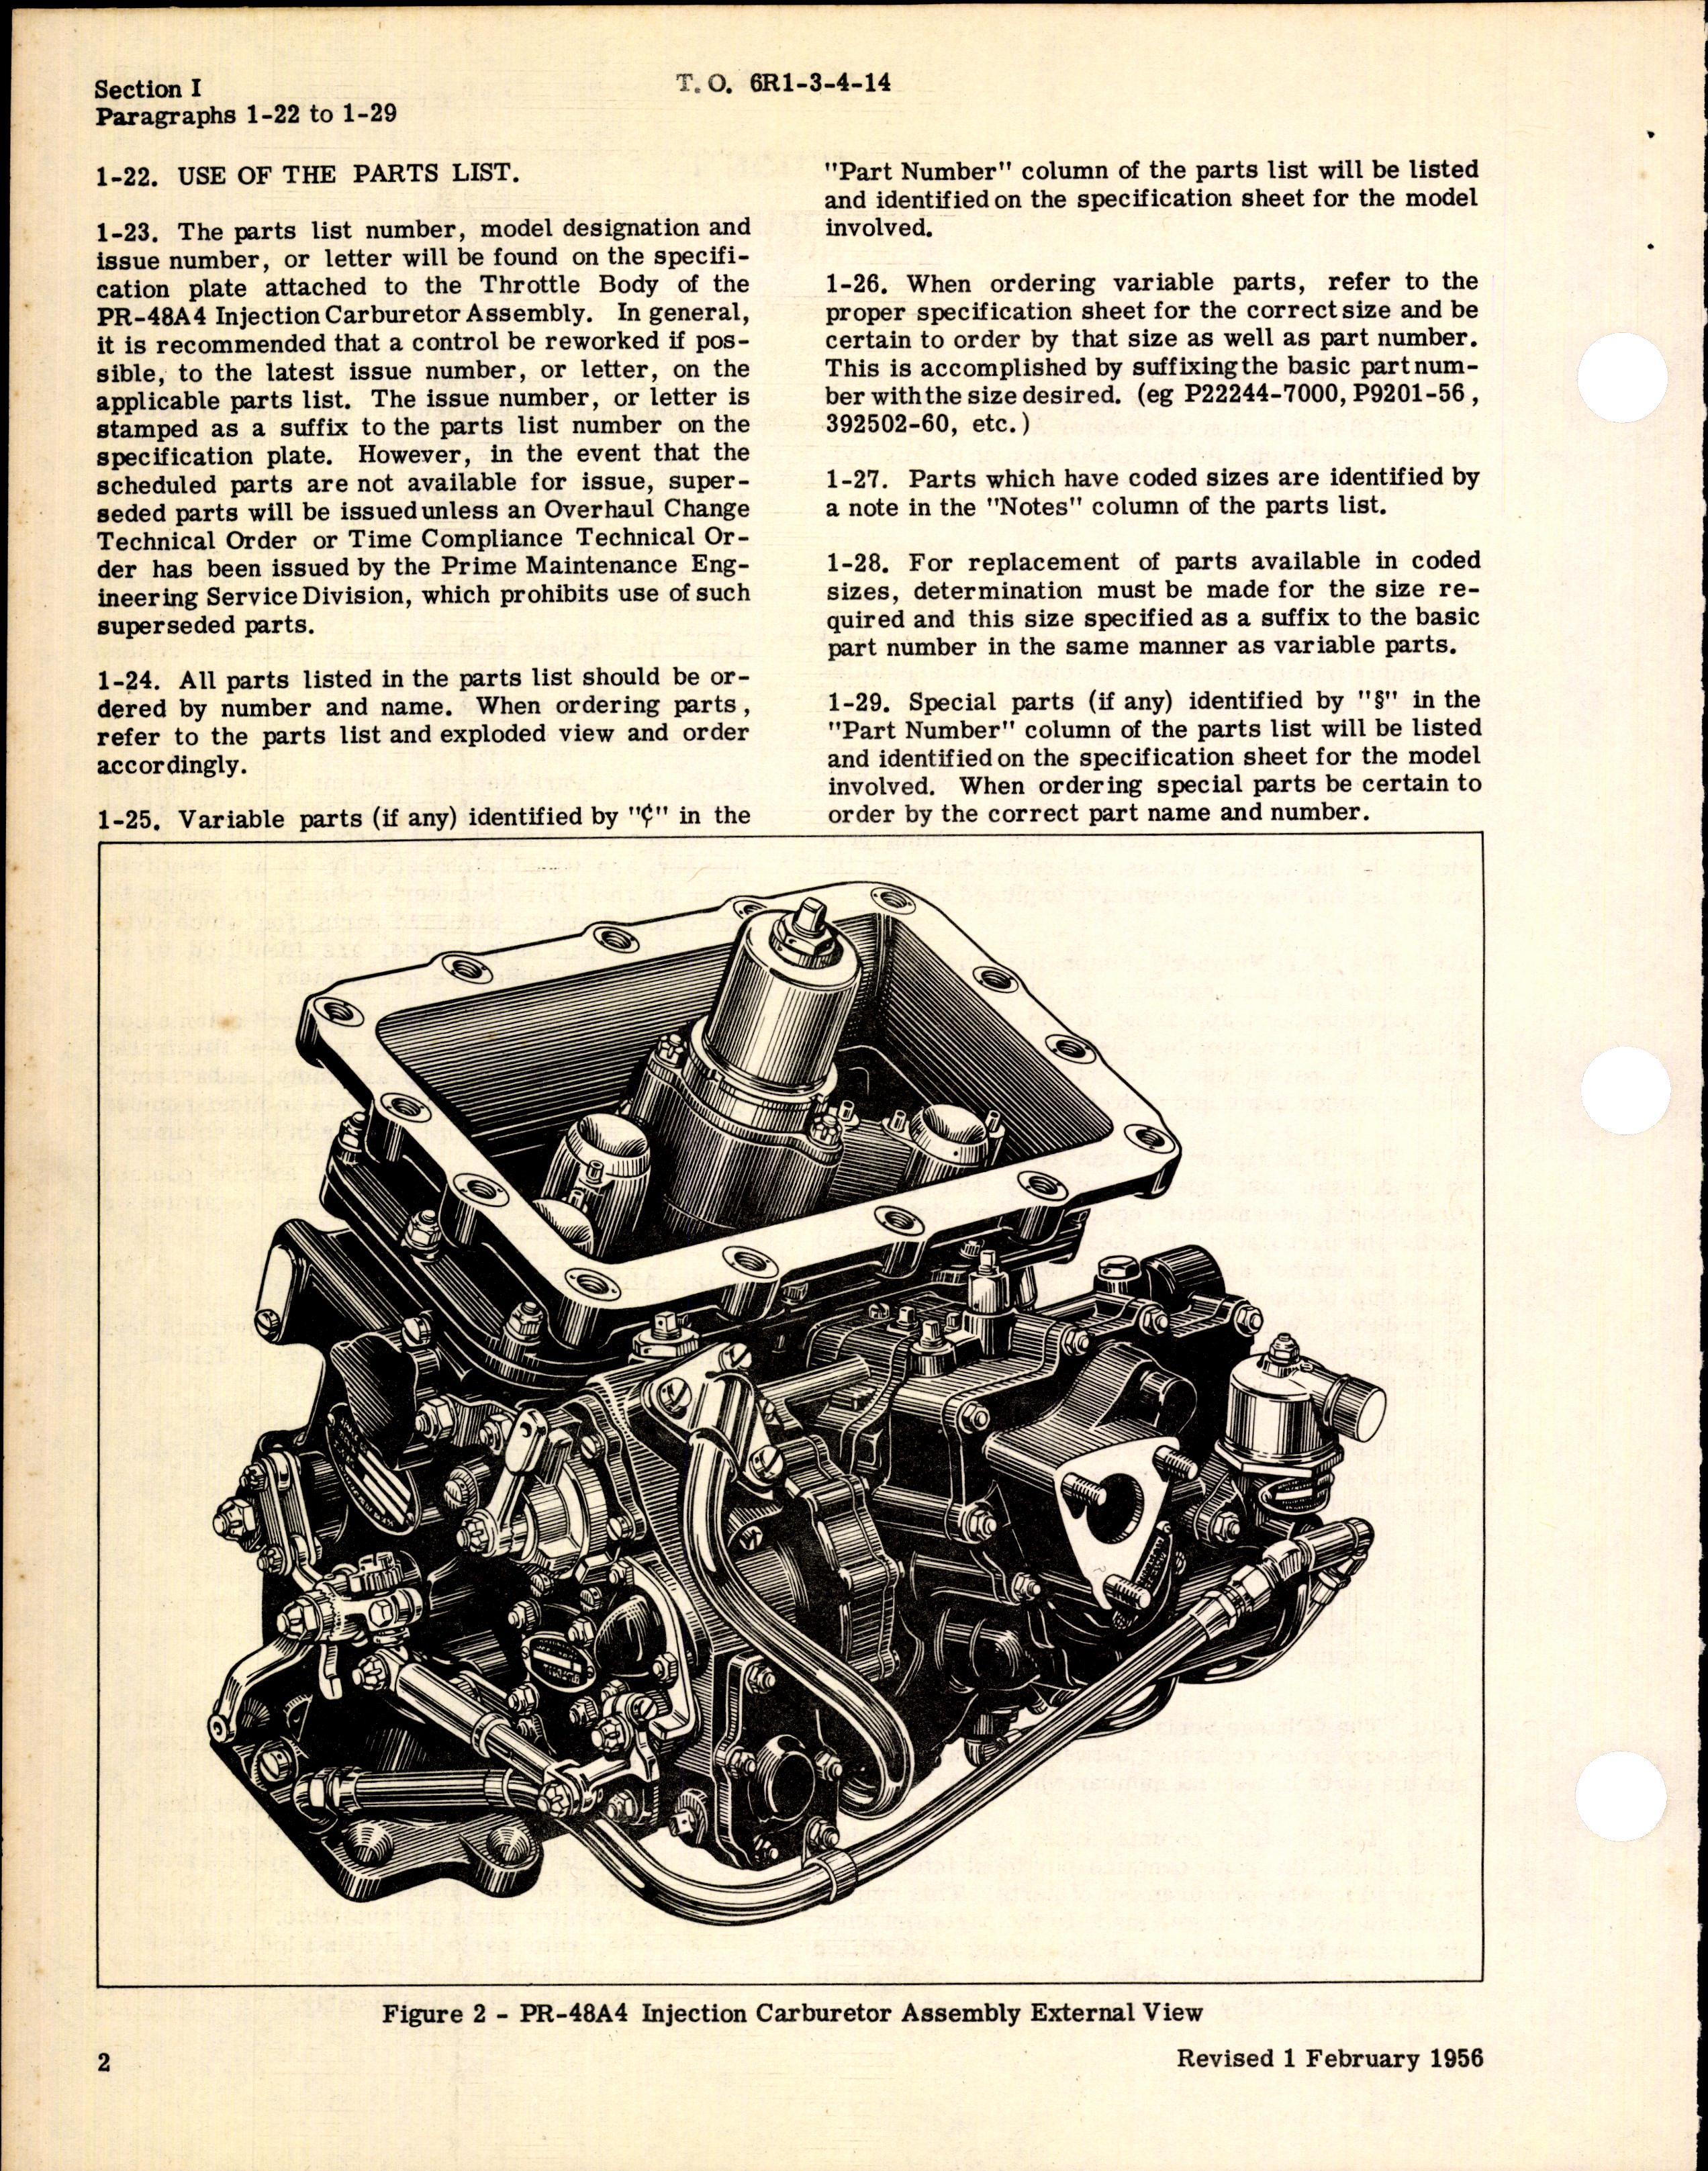 Sample page 4 from AirCorps Library document: Illustrated Parts Breakdown for Injection Carburetor Model PR-48A4